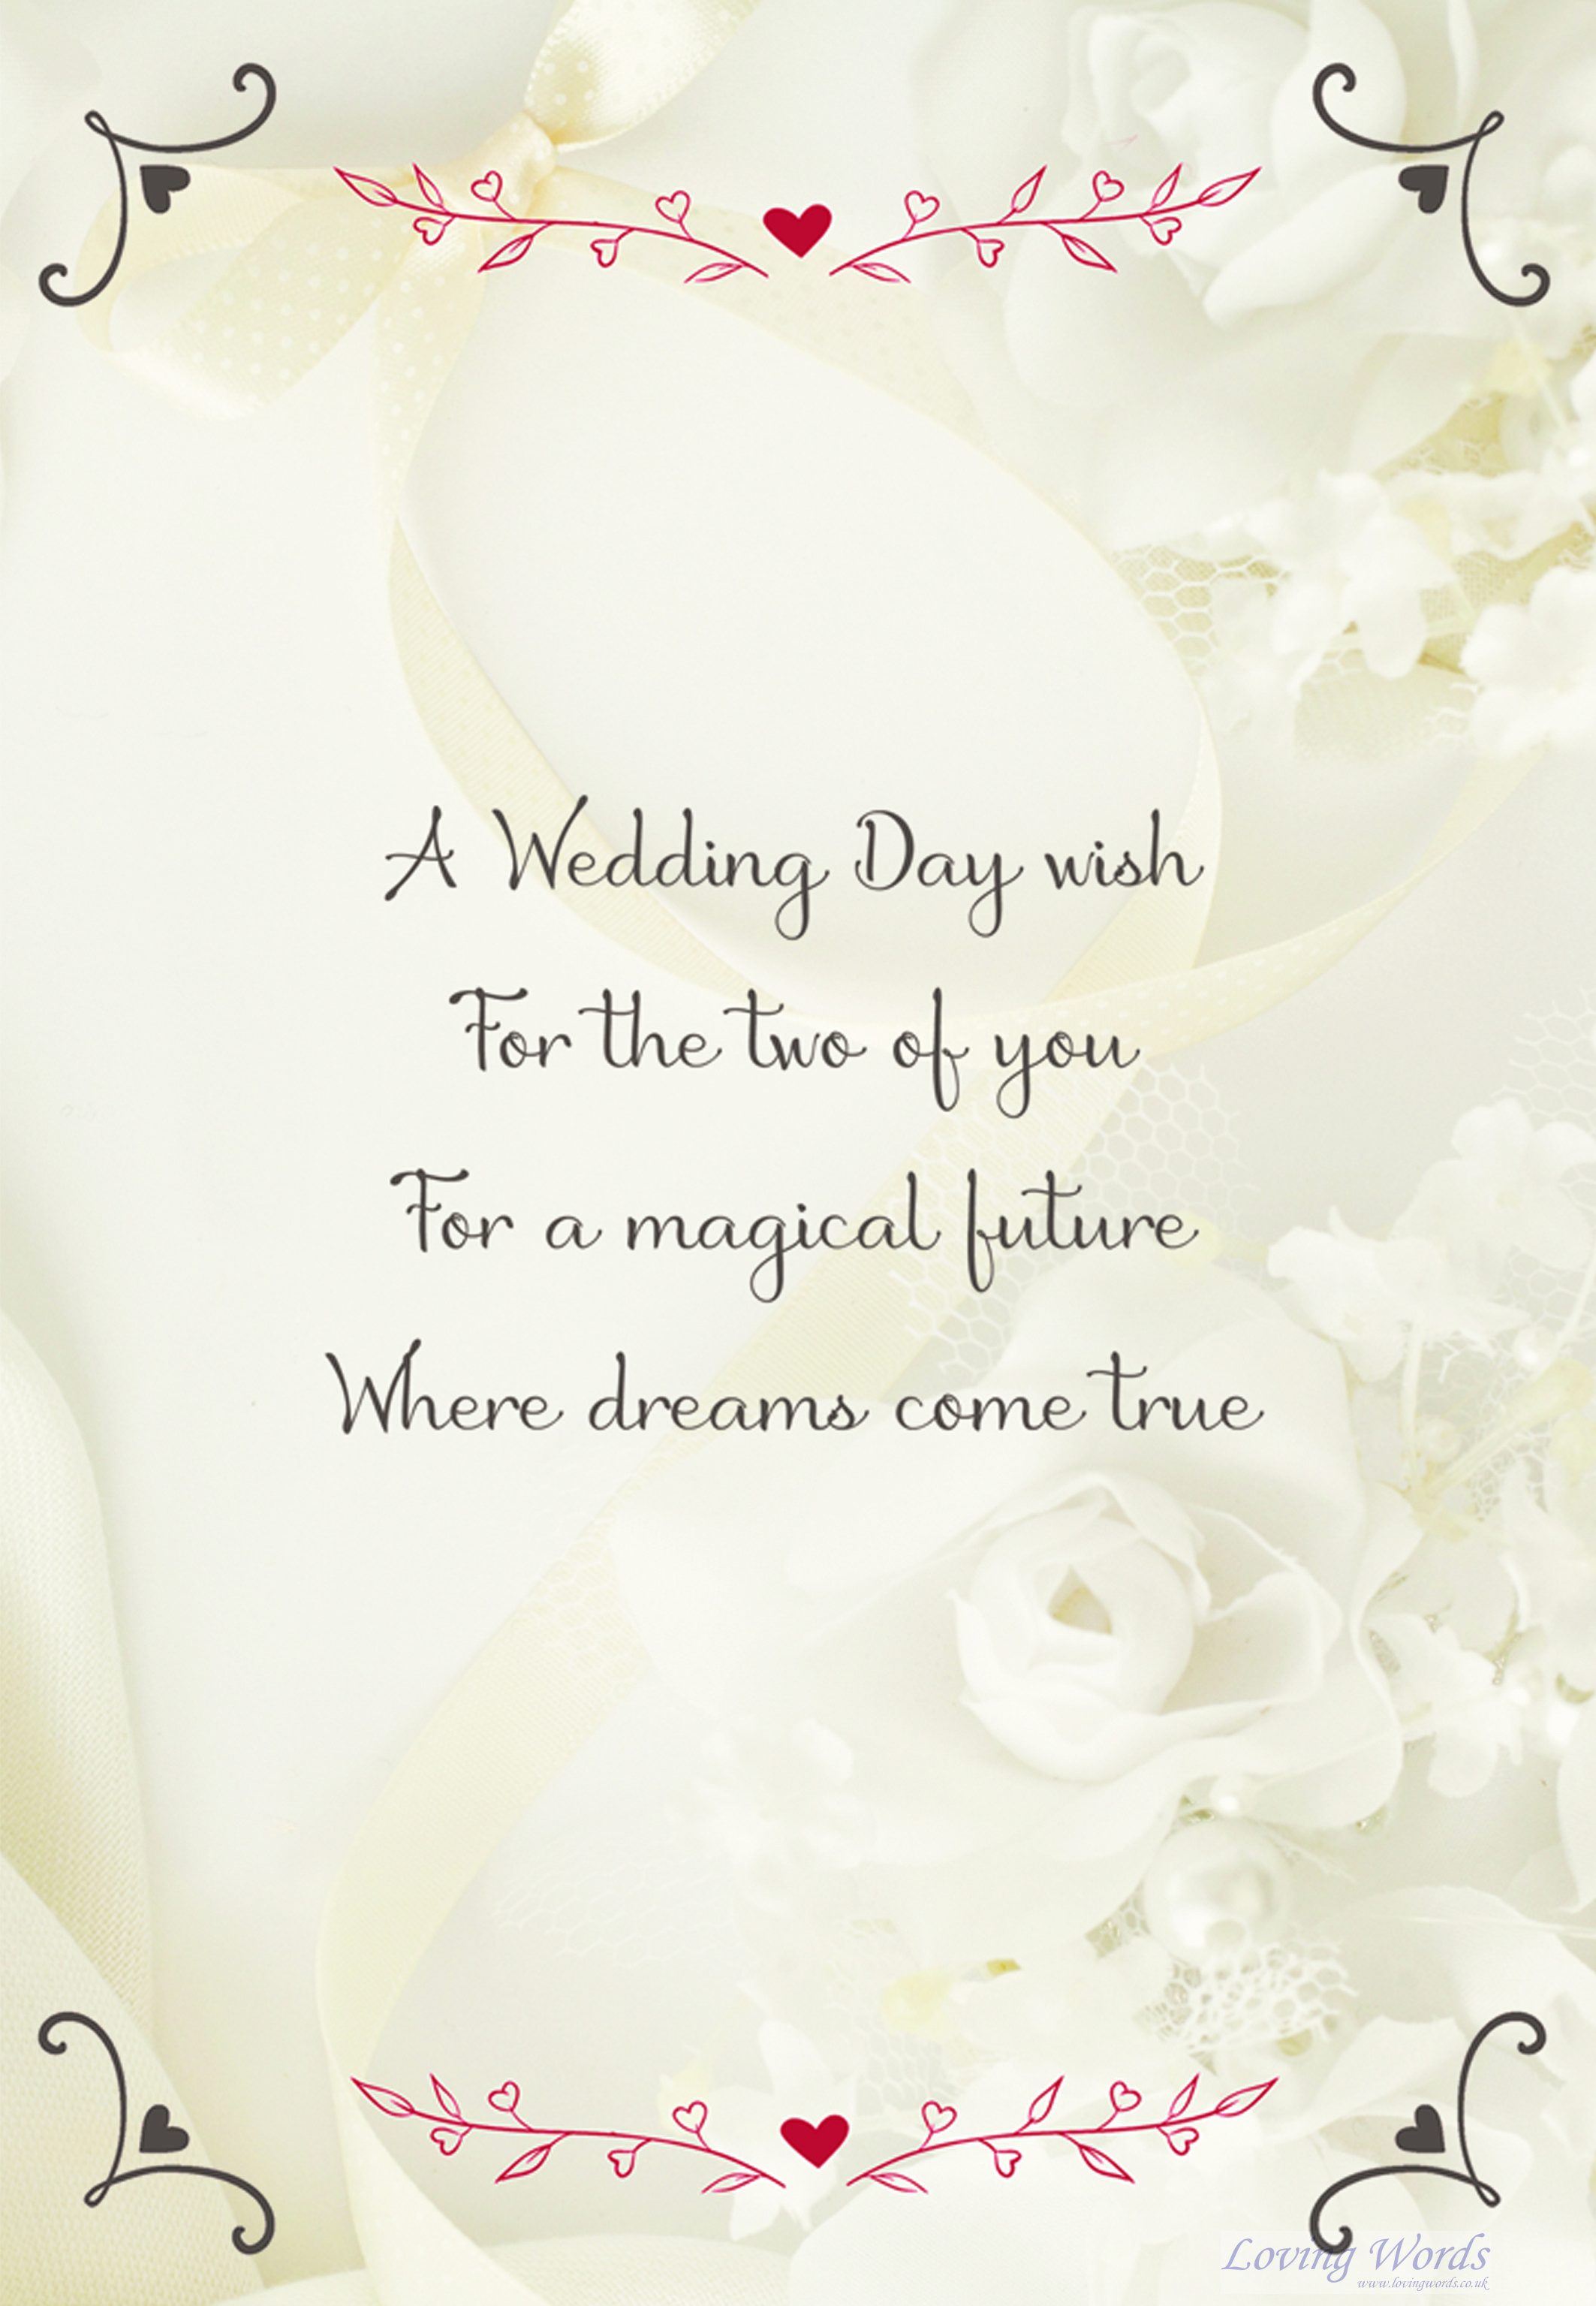 Wedding Wishes Messages Samples Image To U